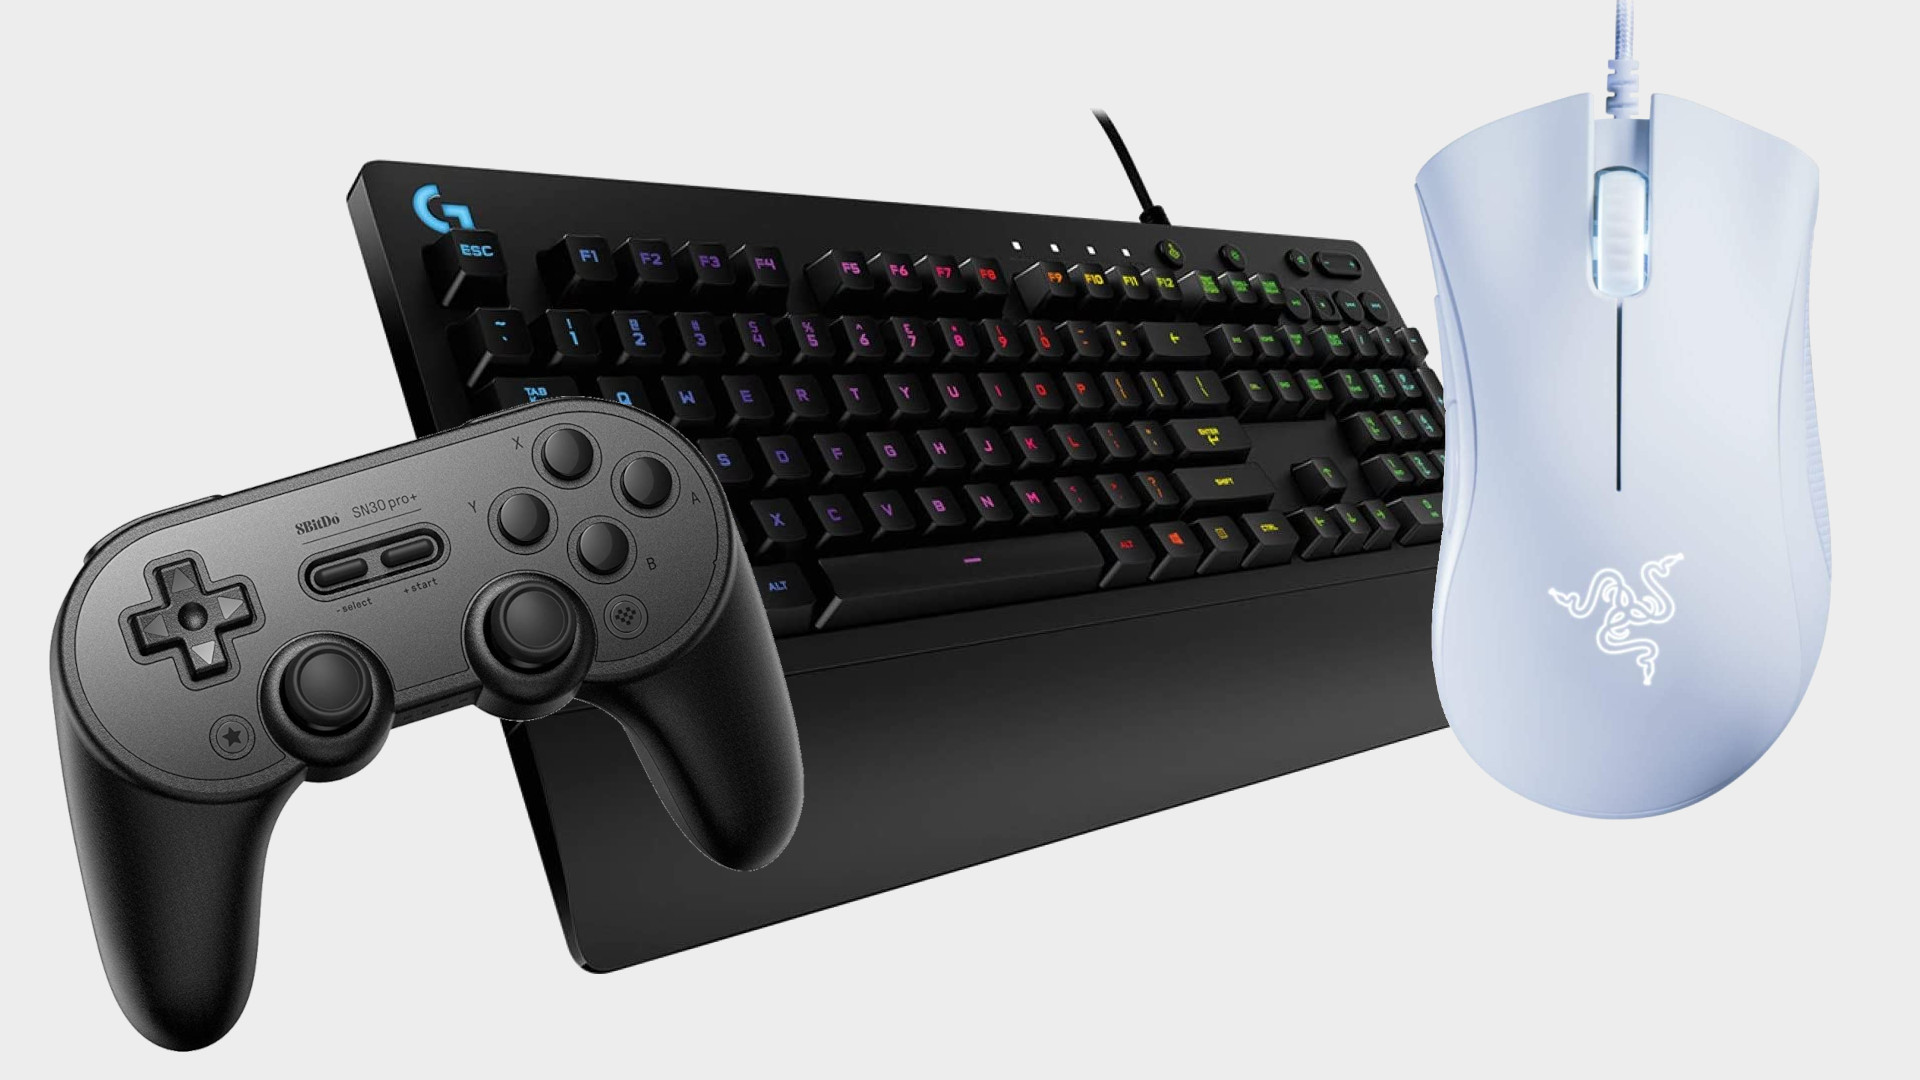  The best Prime Day deals for PC gaming under $50 